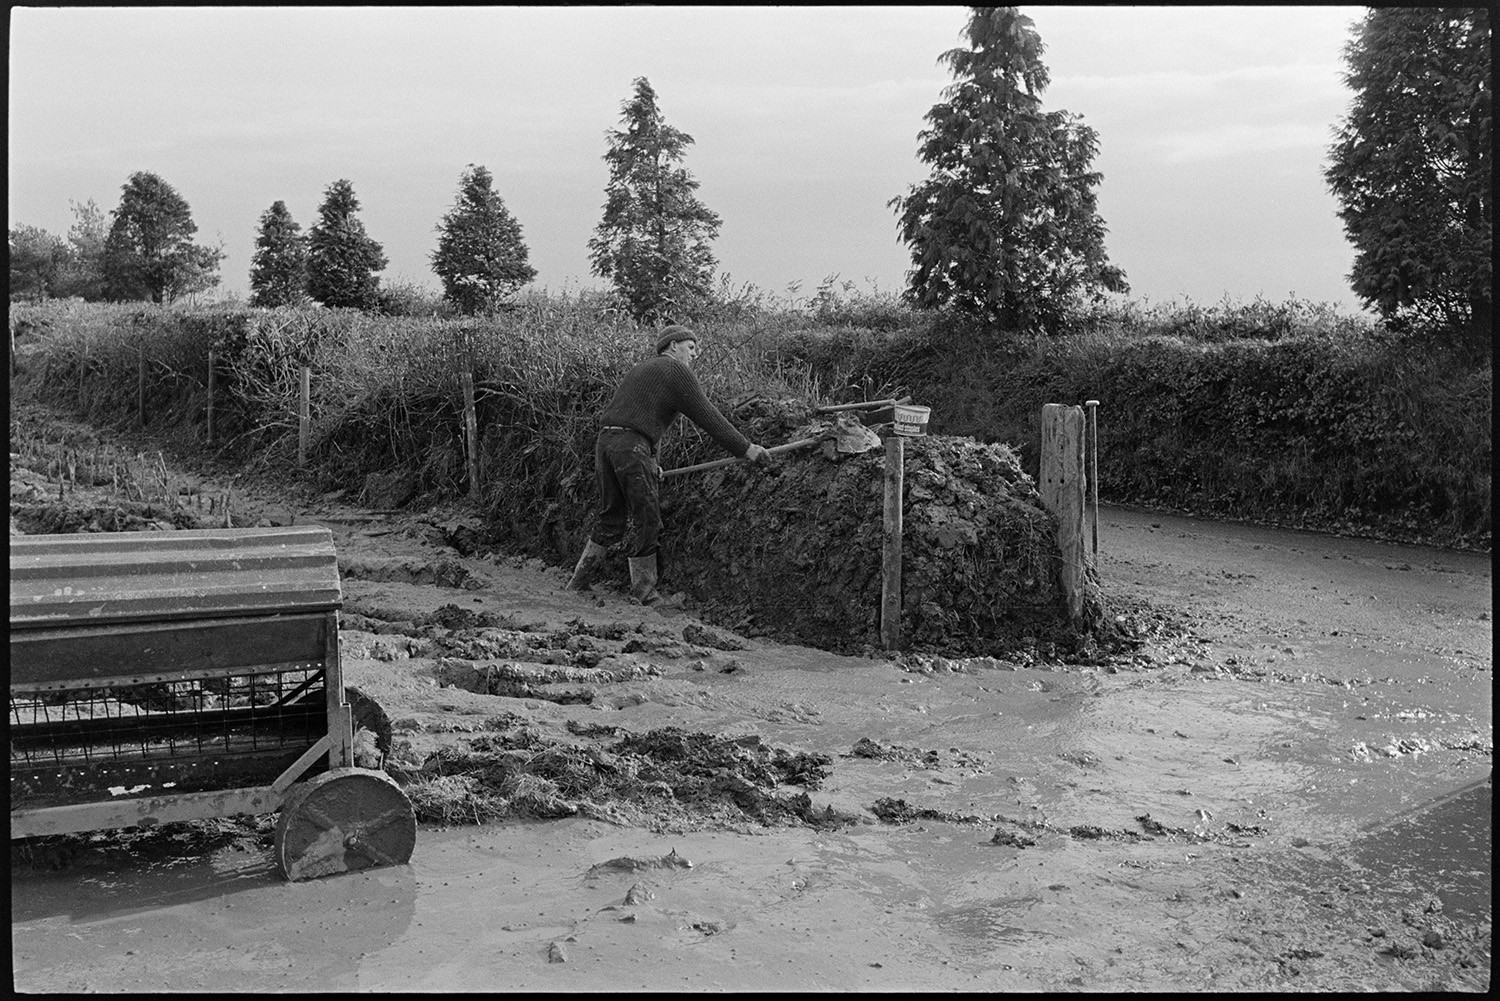 Man clatting up hedge in very muddy field. 
[A man clatting, building up a hedge with turf and mud, using a spade, by the entrance to a very muddy field at Ashreigney. A road runs alongside the field and a hay feeder can be seen in the mud in the foreground.]